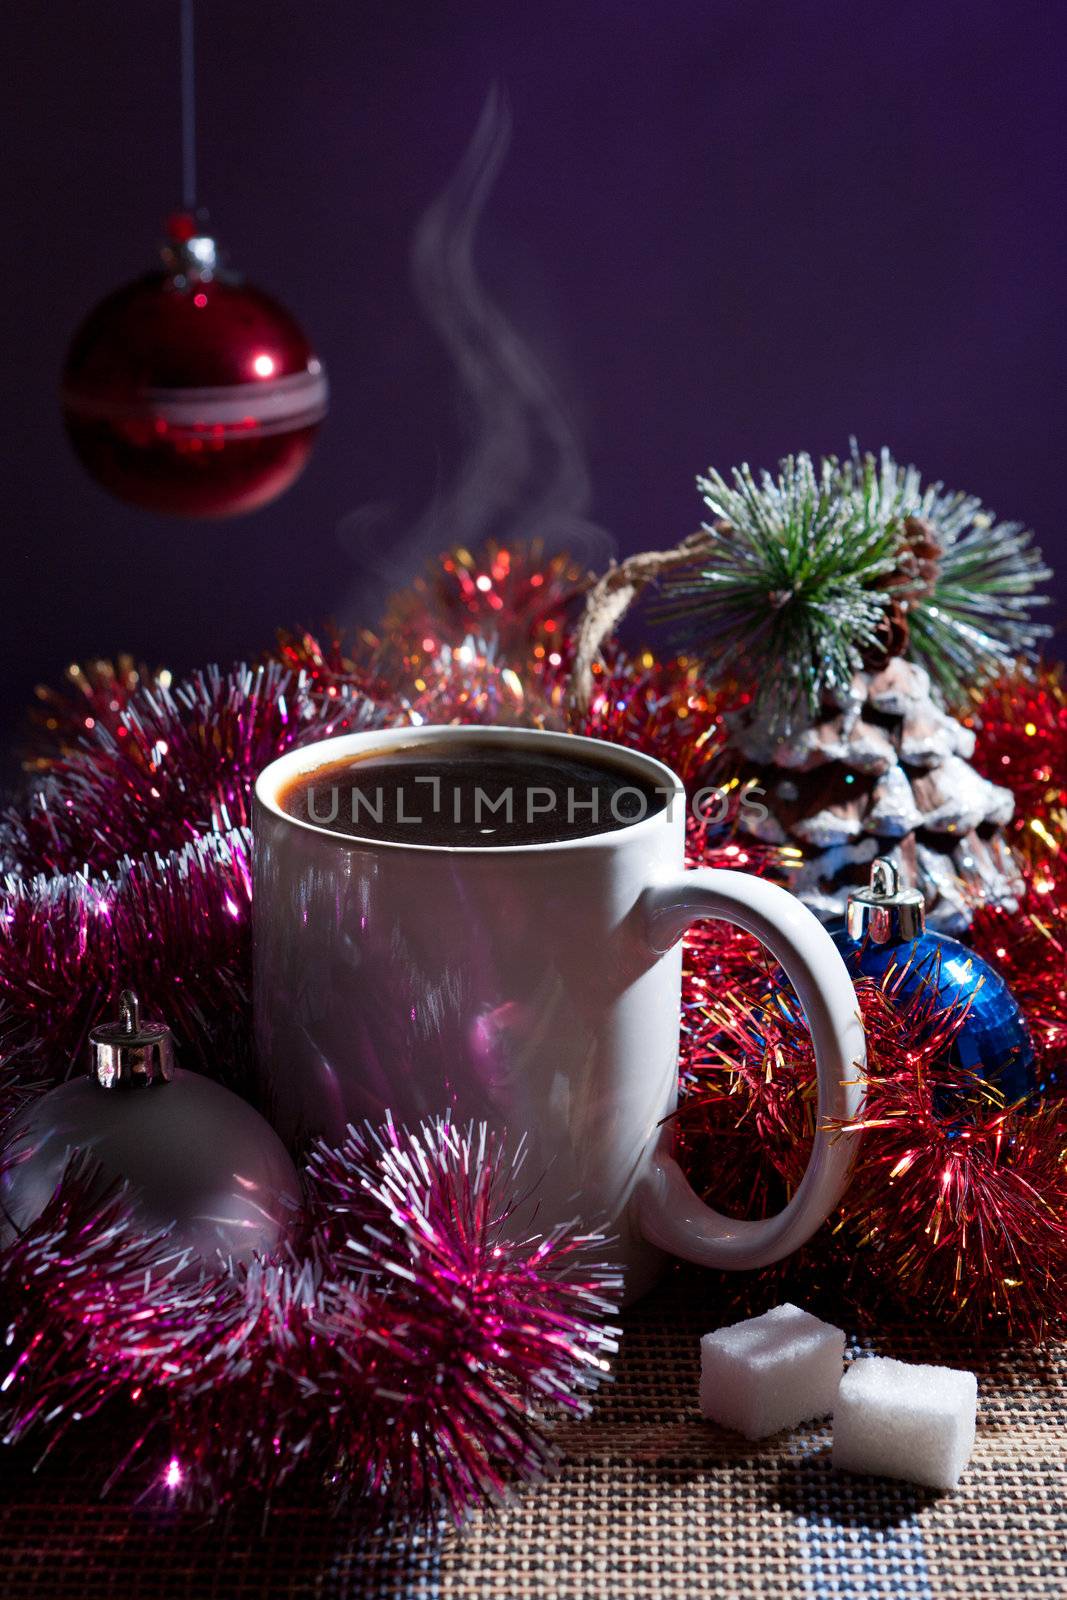 winter still life with coffee and Christmas decorations